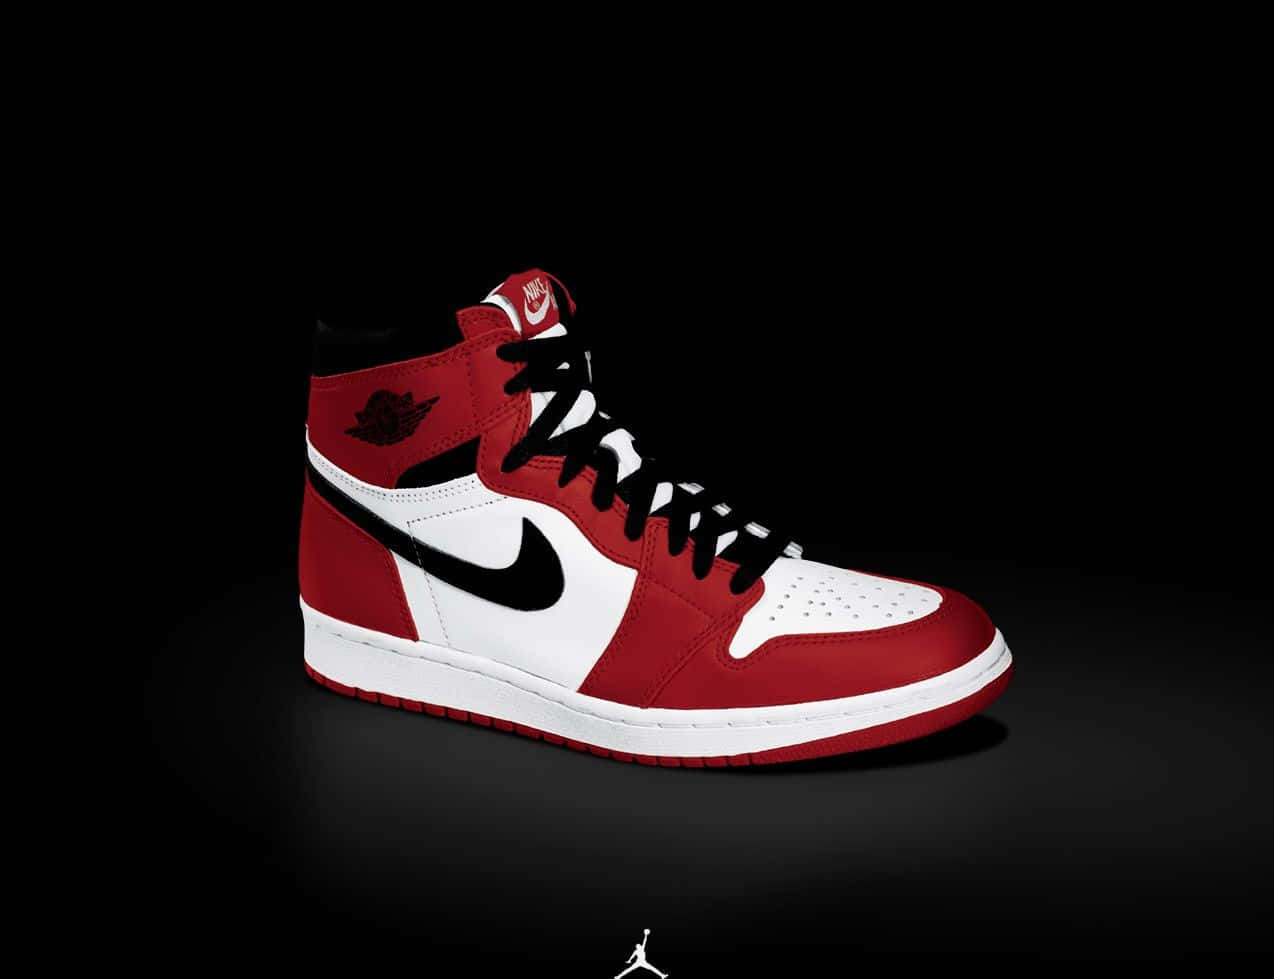 A Red And White Jordan Shoe On A Black Background Wallpaper